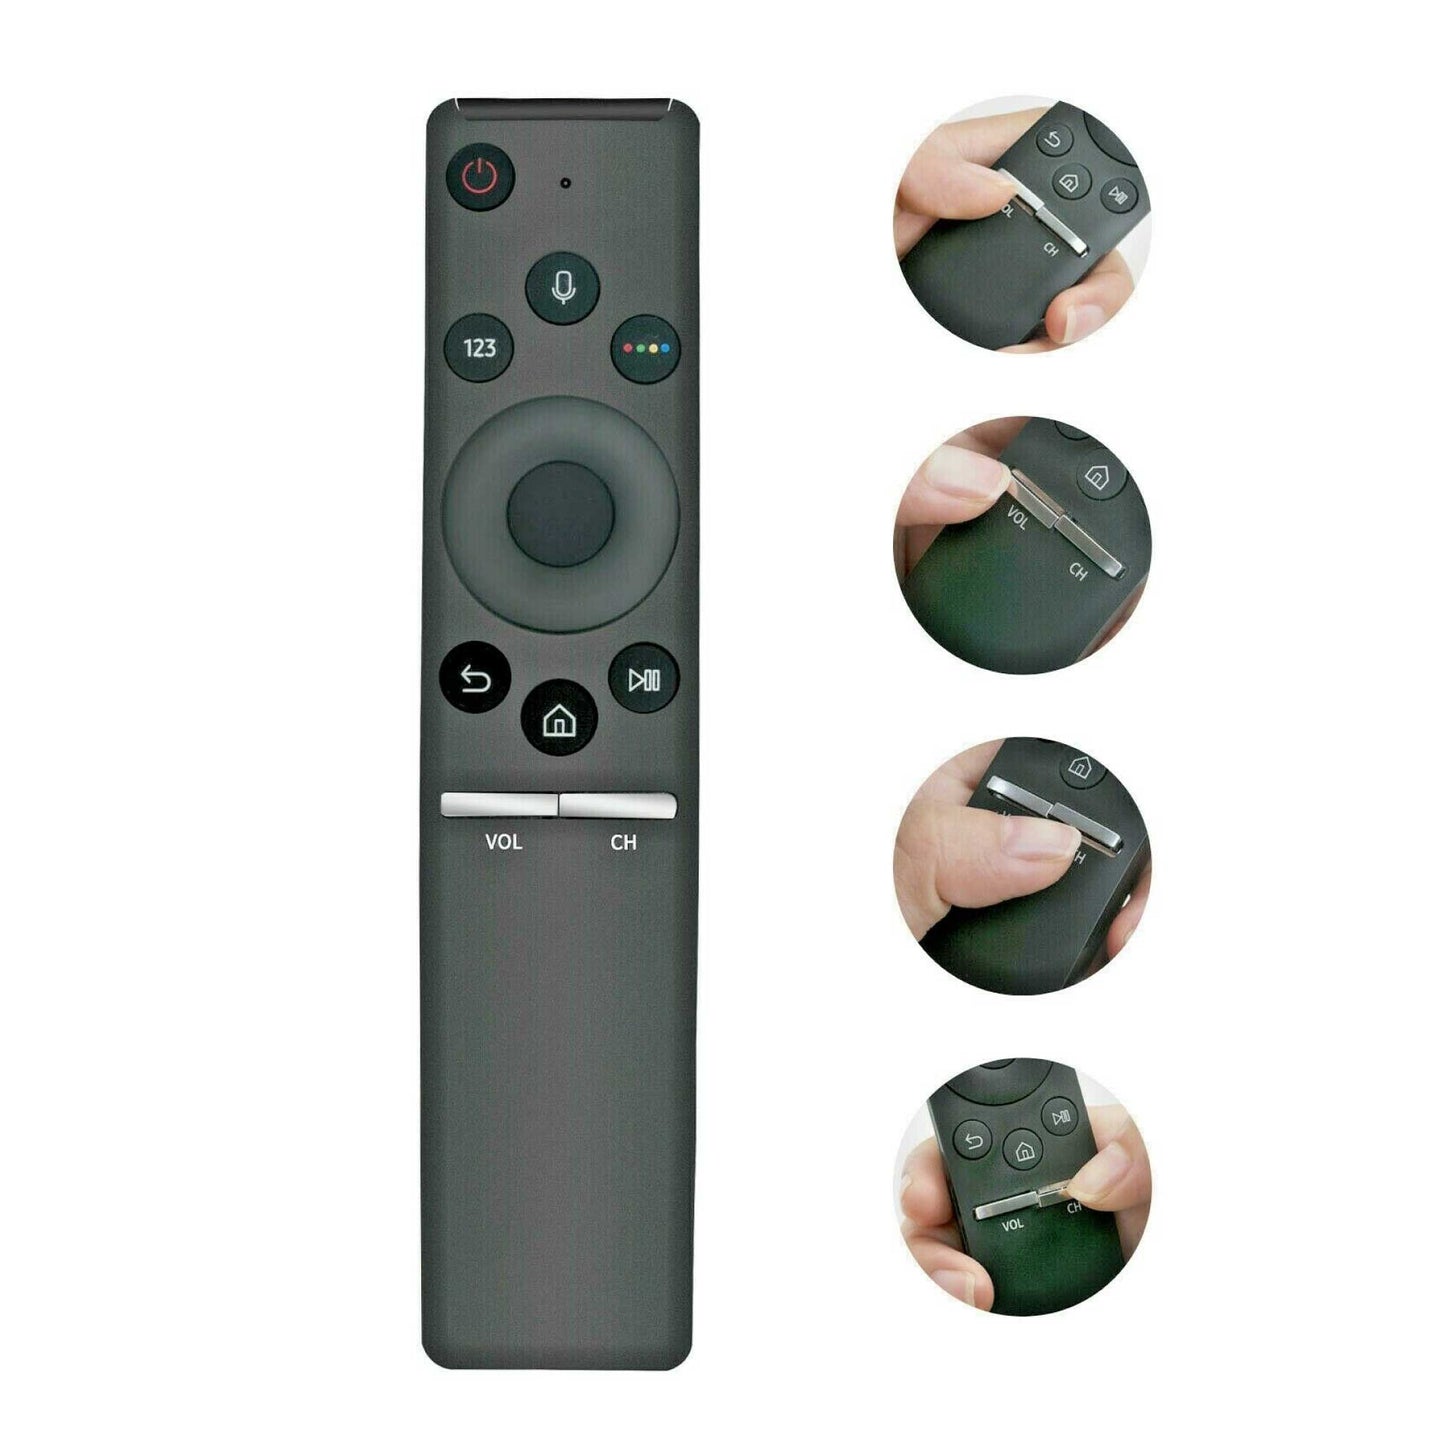 4K UHD Bluetooth Voice Remote For Samsung Control Replacement Bixby BN59-01259B